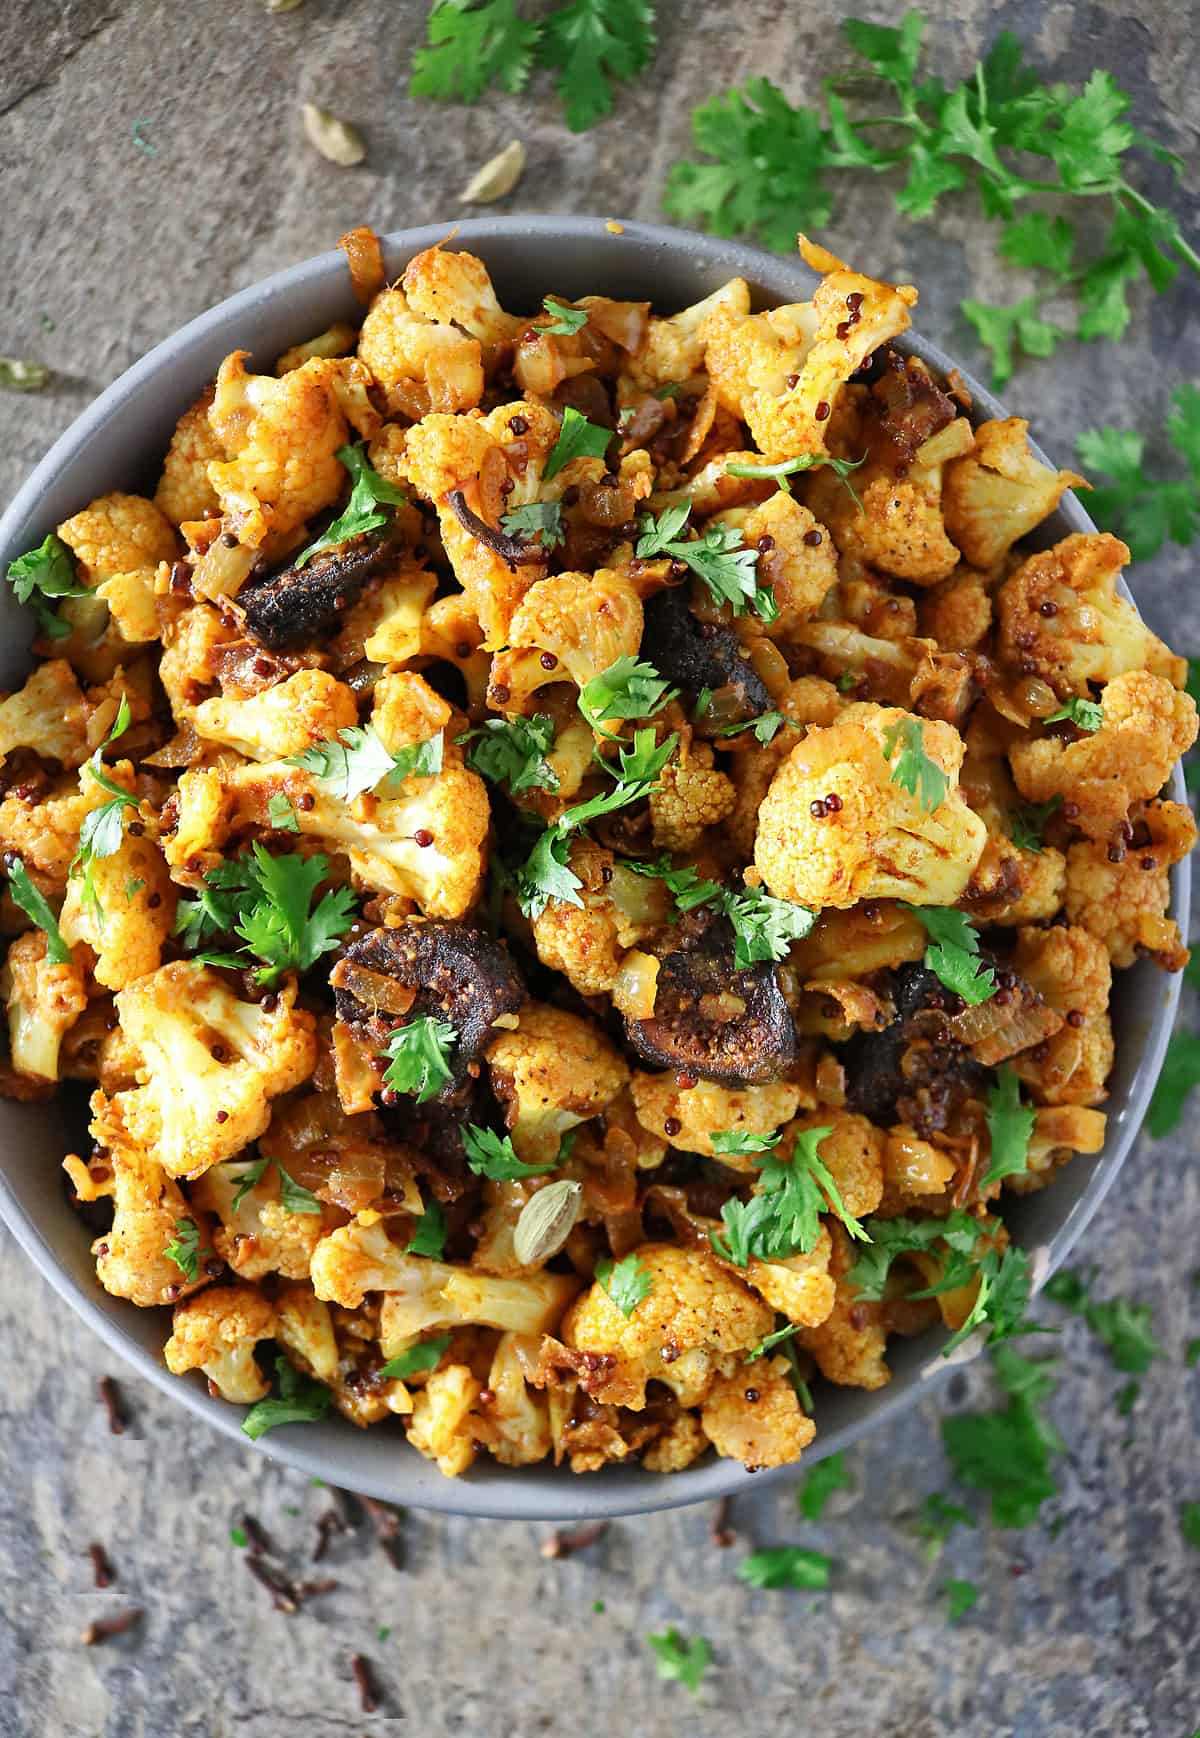 Spicy cauliflower with figs garnished with parsley in a bowl.